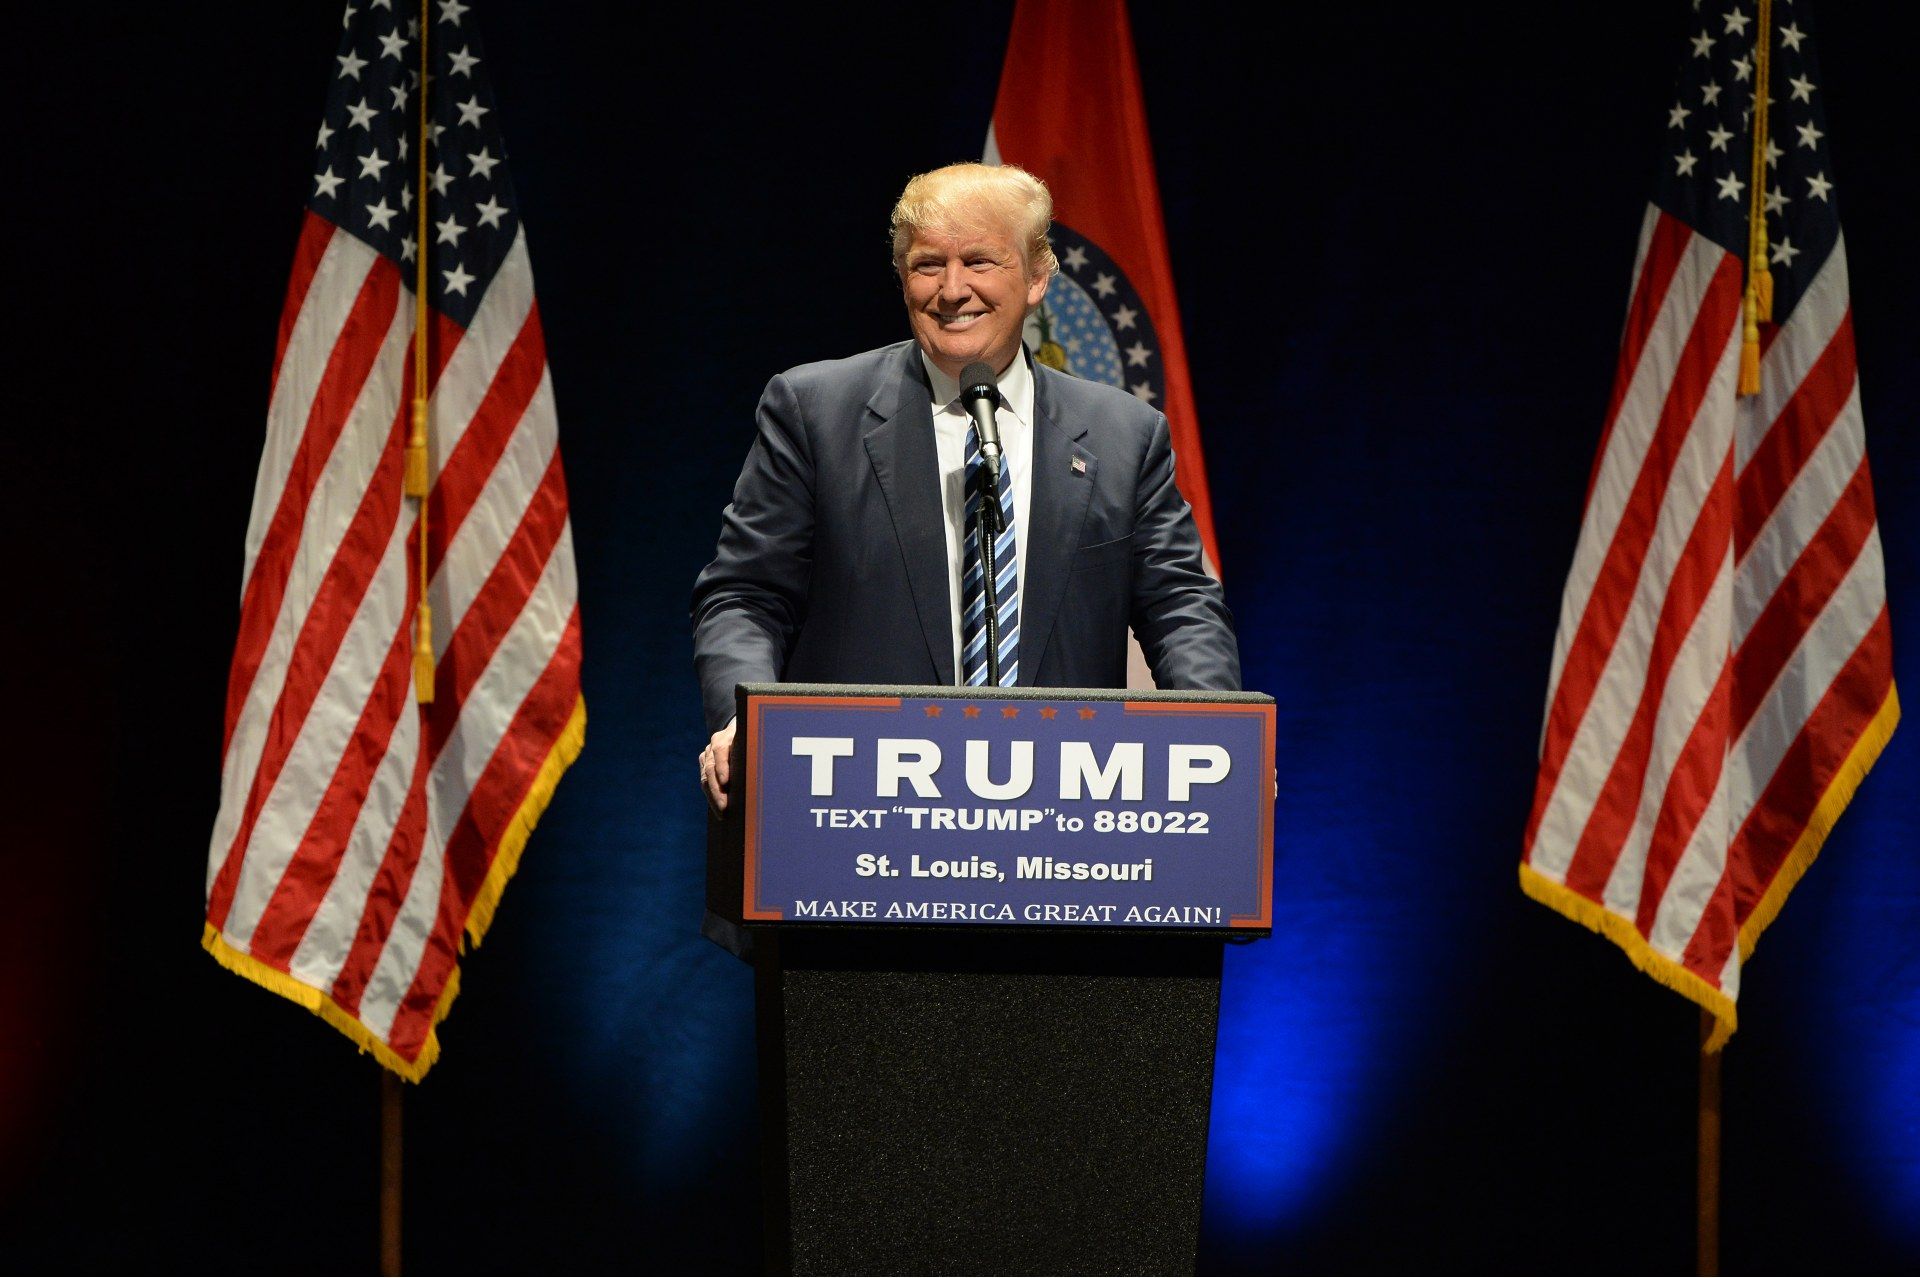 Donald Trump speaks at a podium in front of U.S. and Missouri state flags - election results